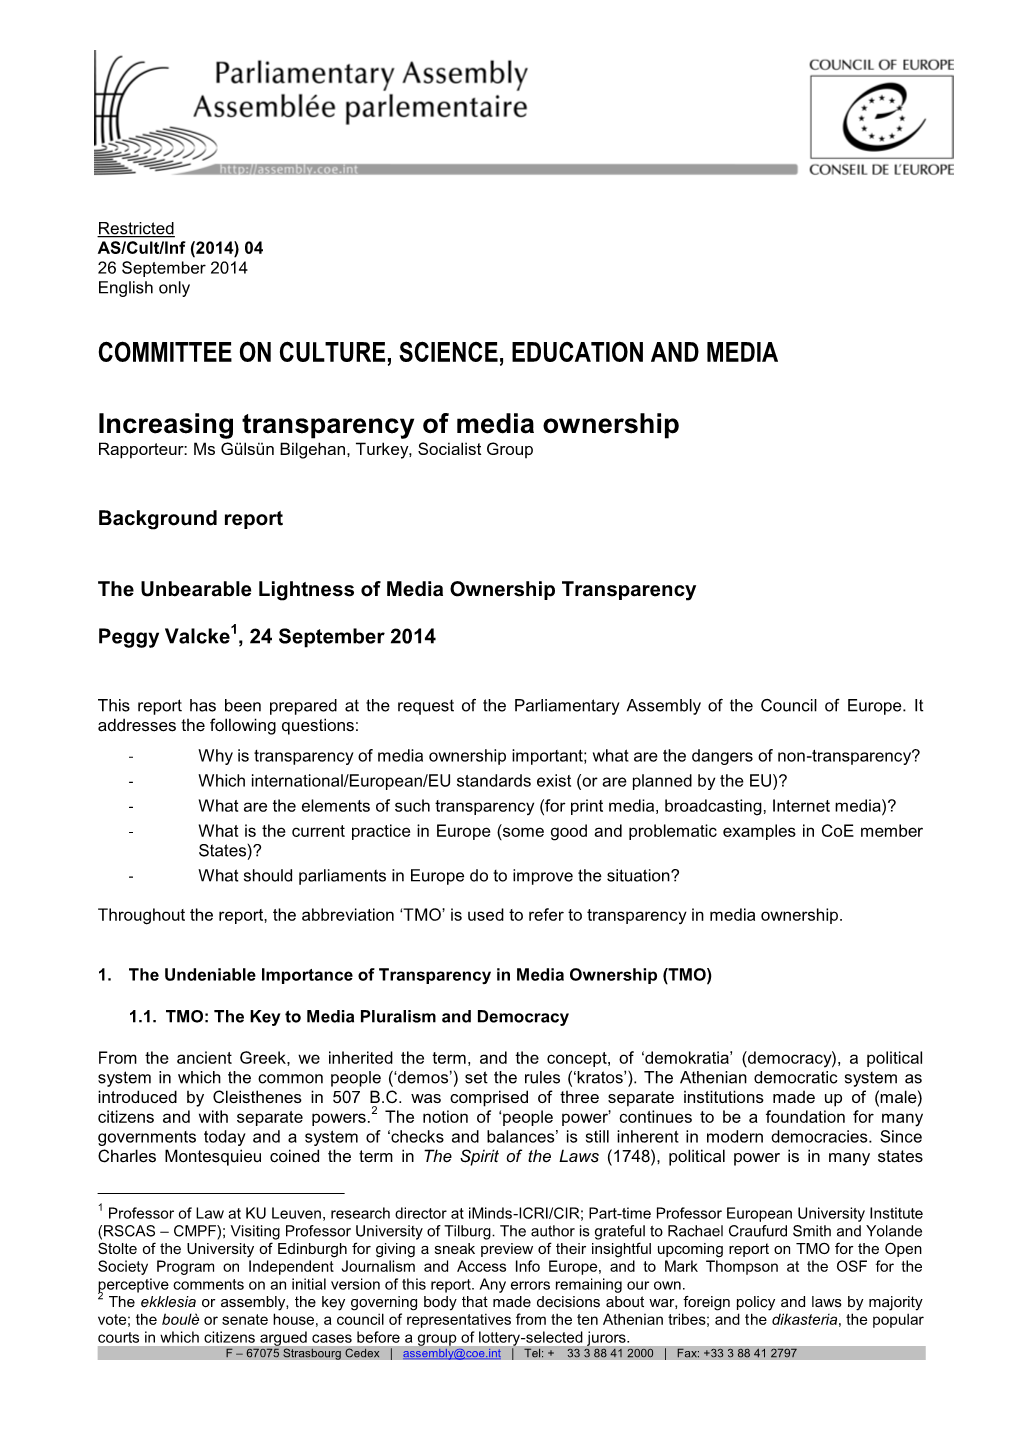 The Unbearable Lightness of Media Ownership Transparency